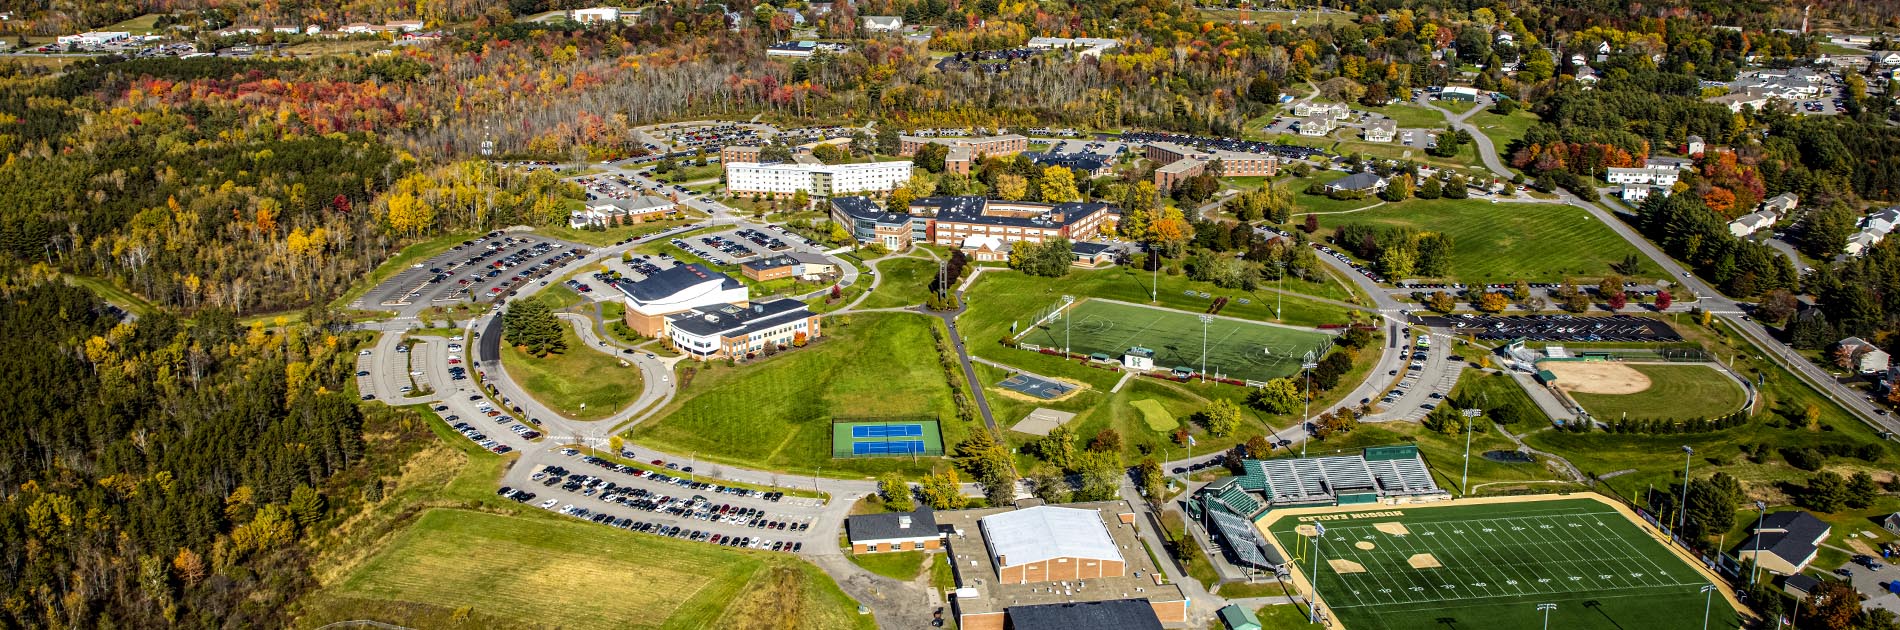 an aerial image of the campus of Husson University